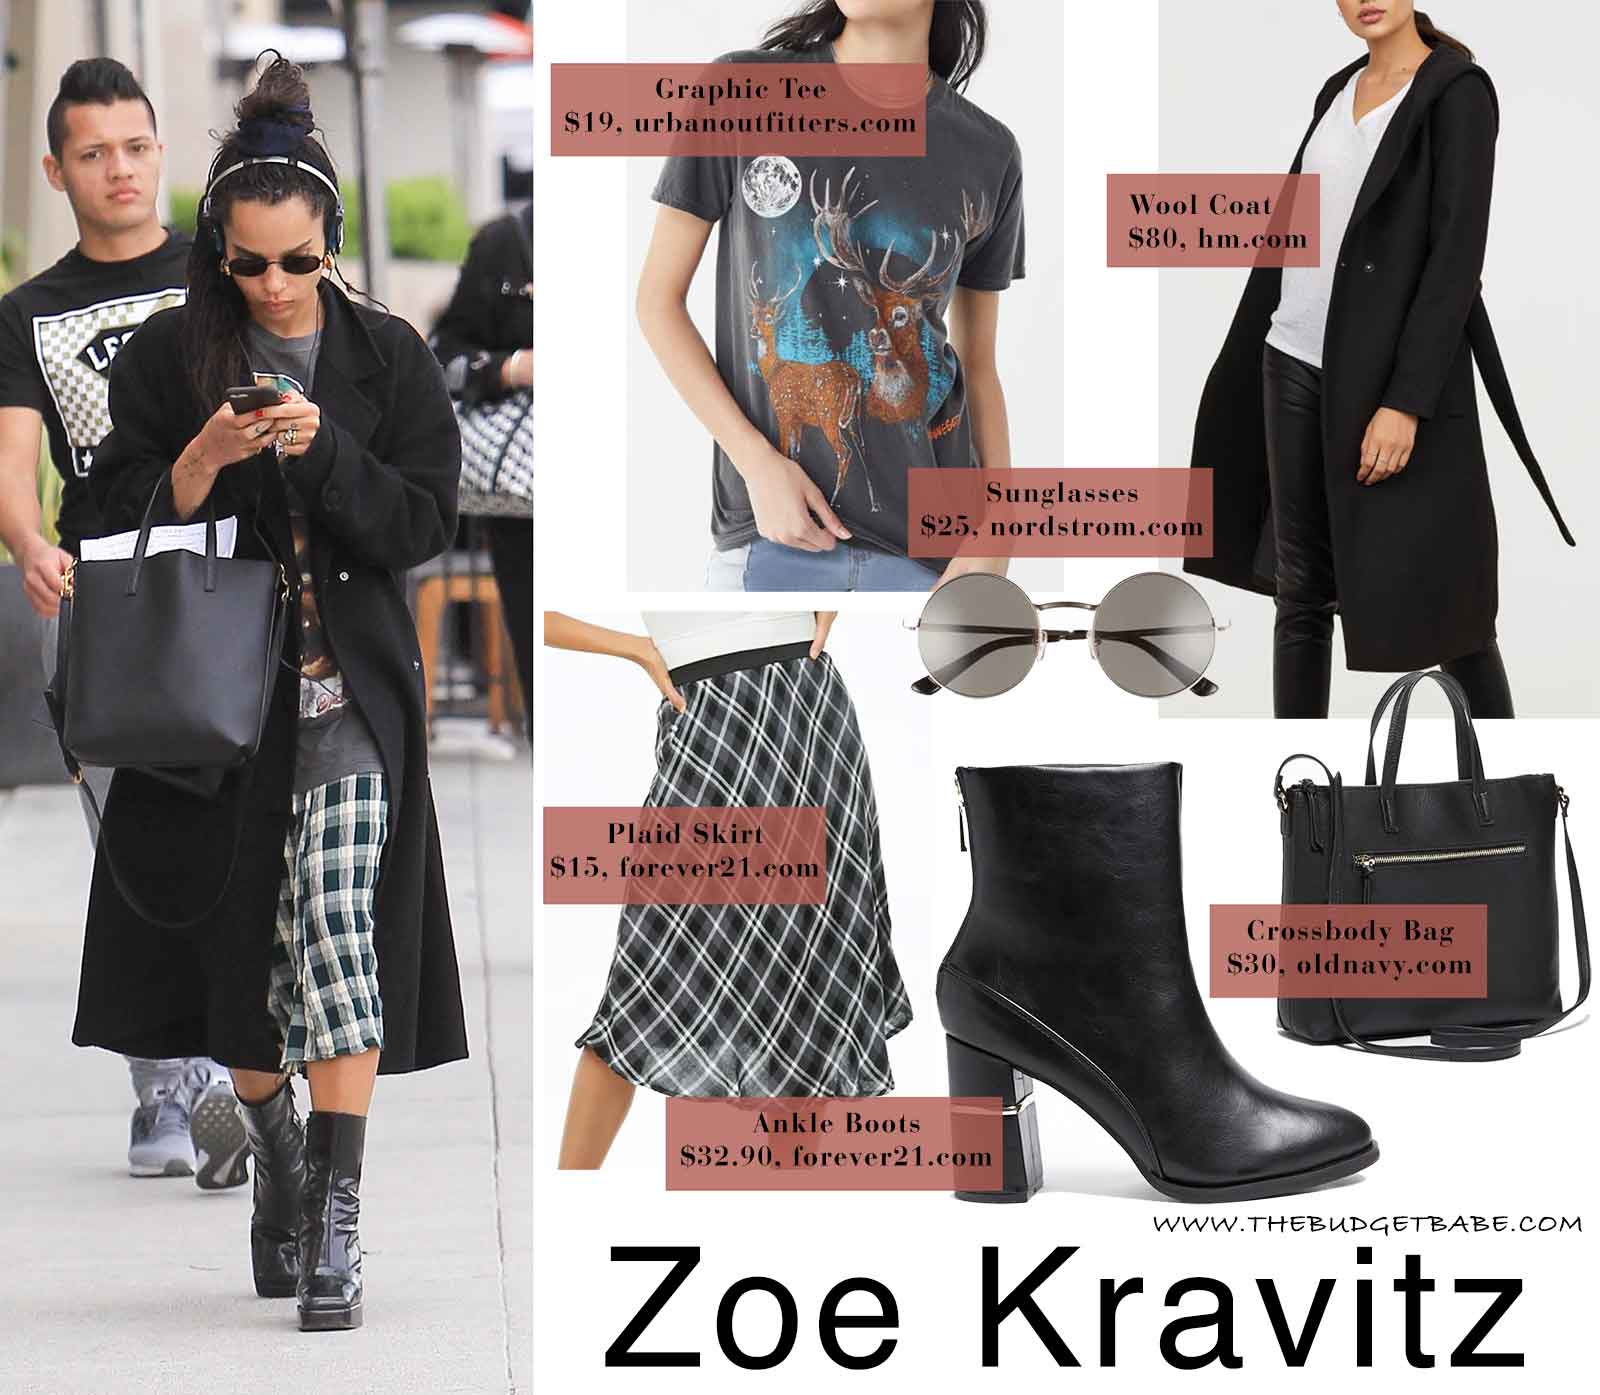 Zoe Kravitz in a plaid skirt and platform ankle boots